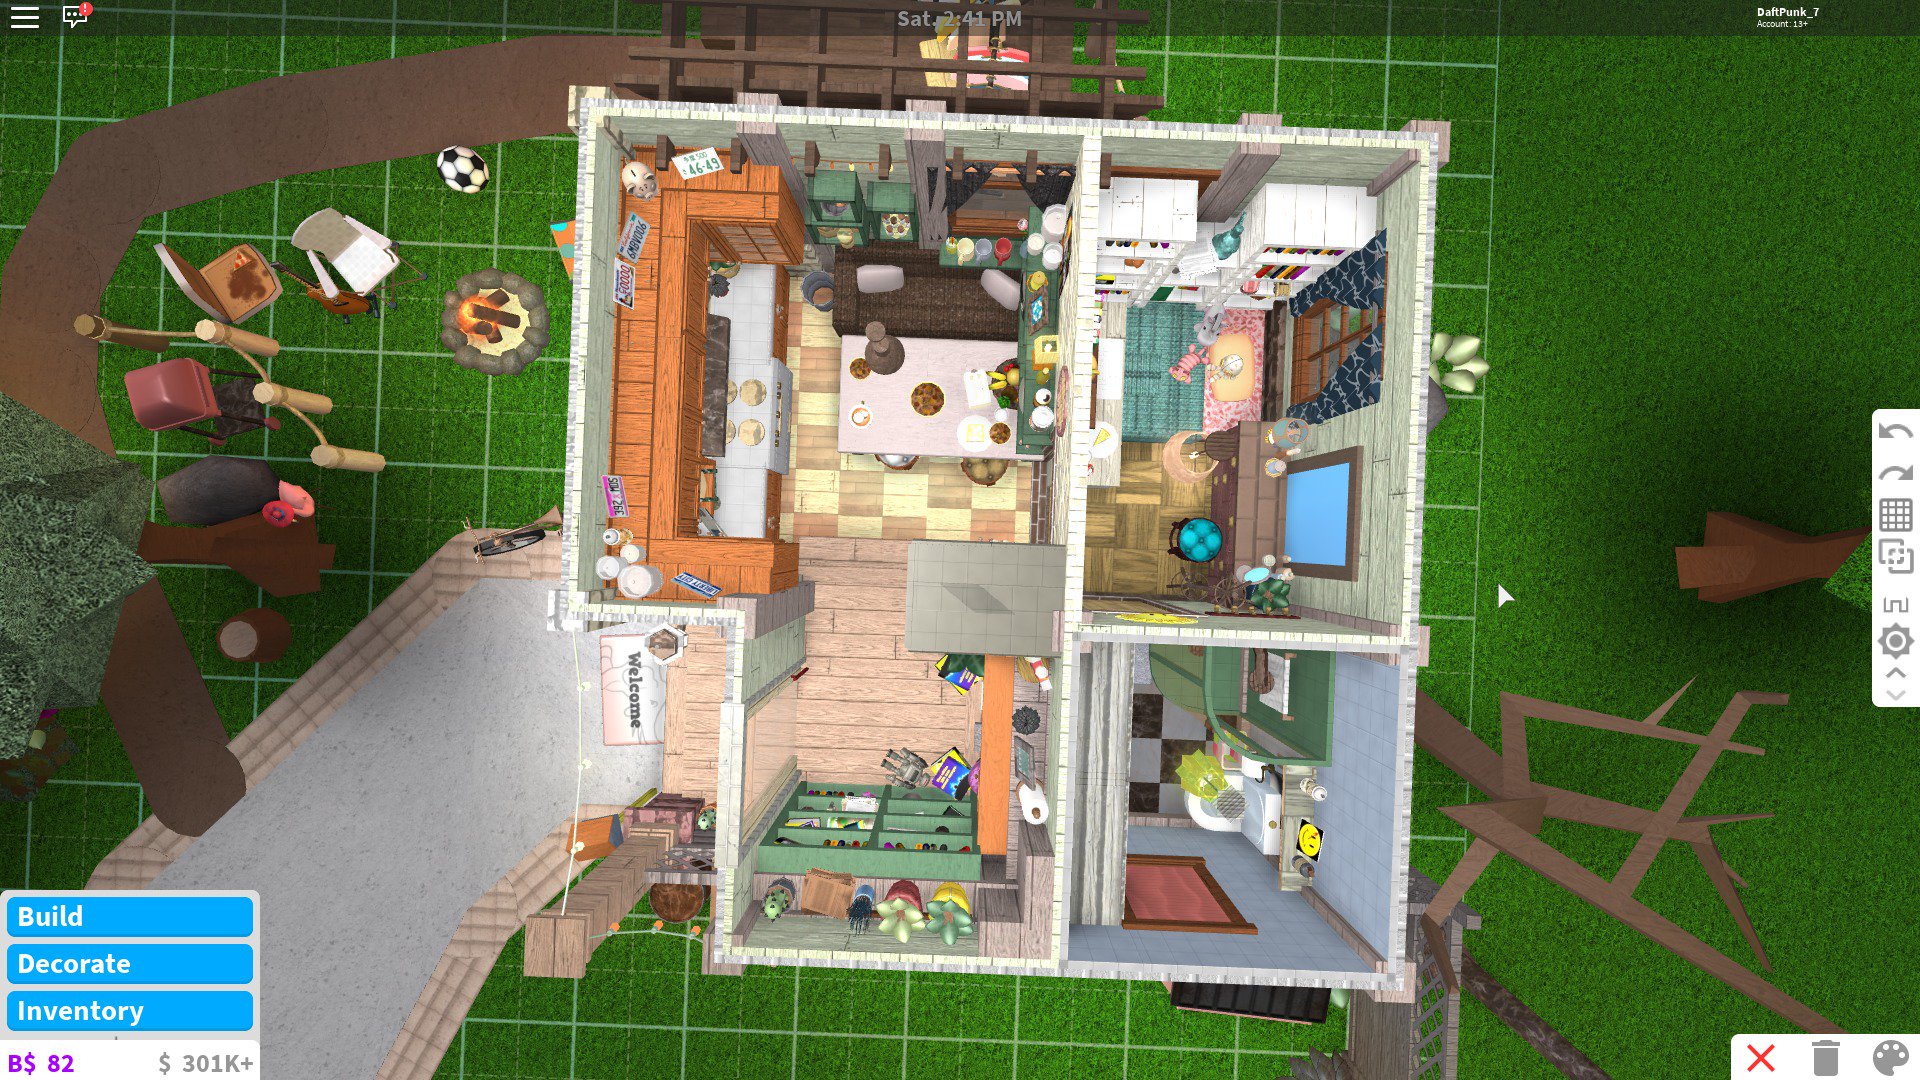 7 on Twitter: &quot;Crowded Tiny House - 74K Additional Photos. #Roblox #